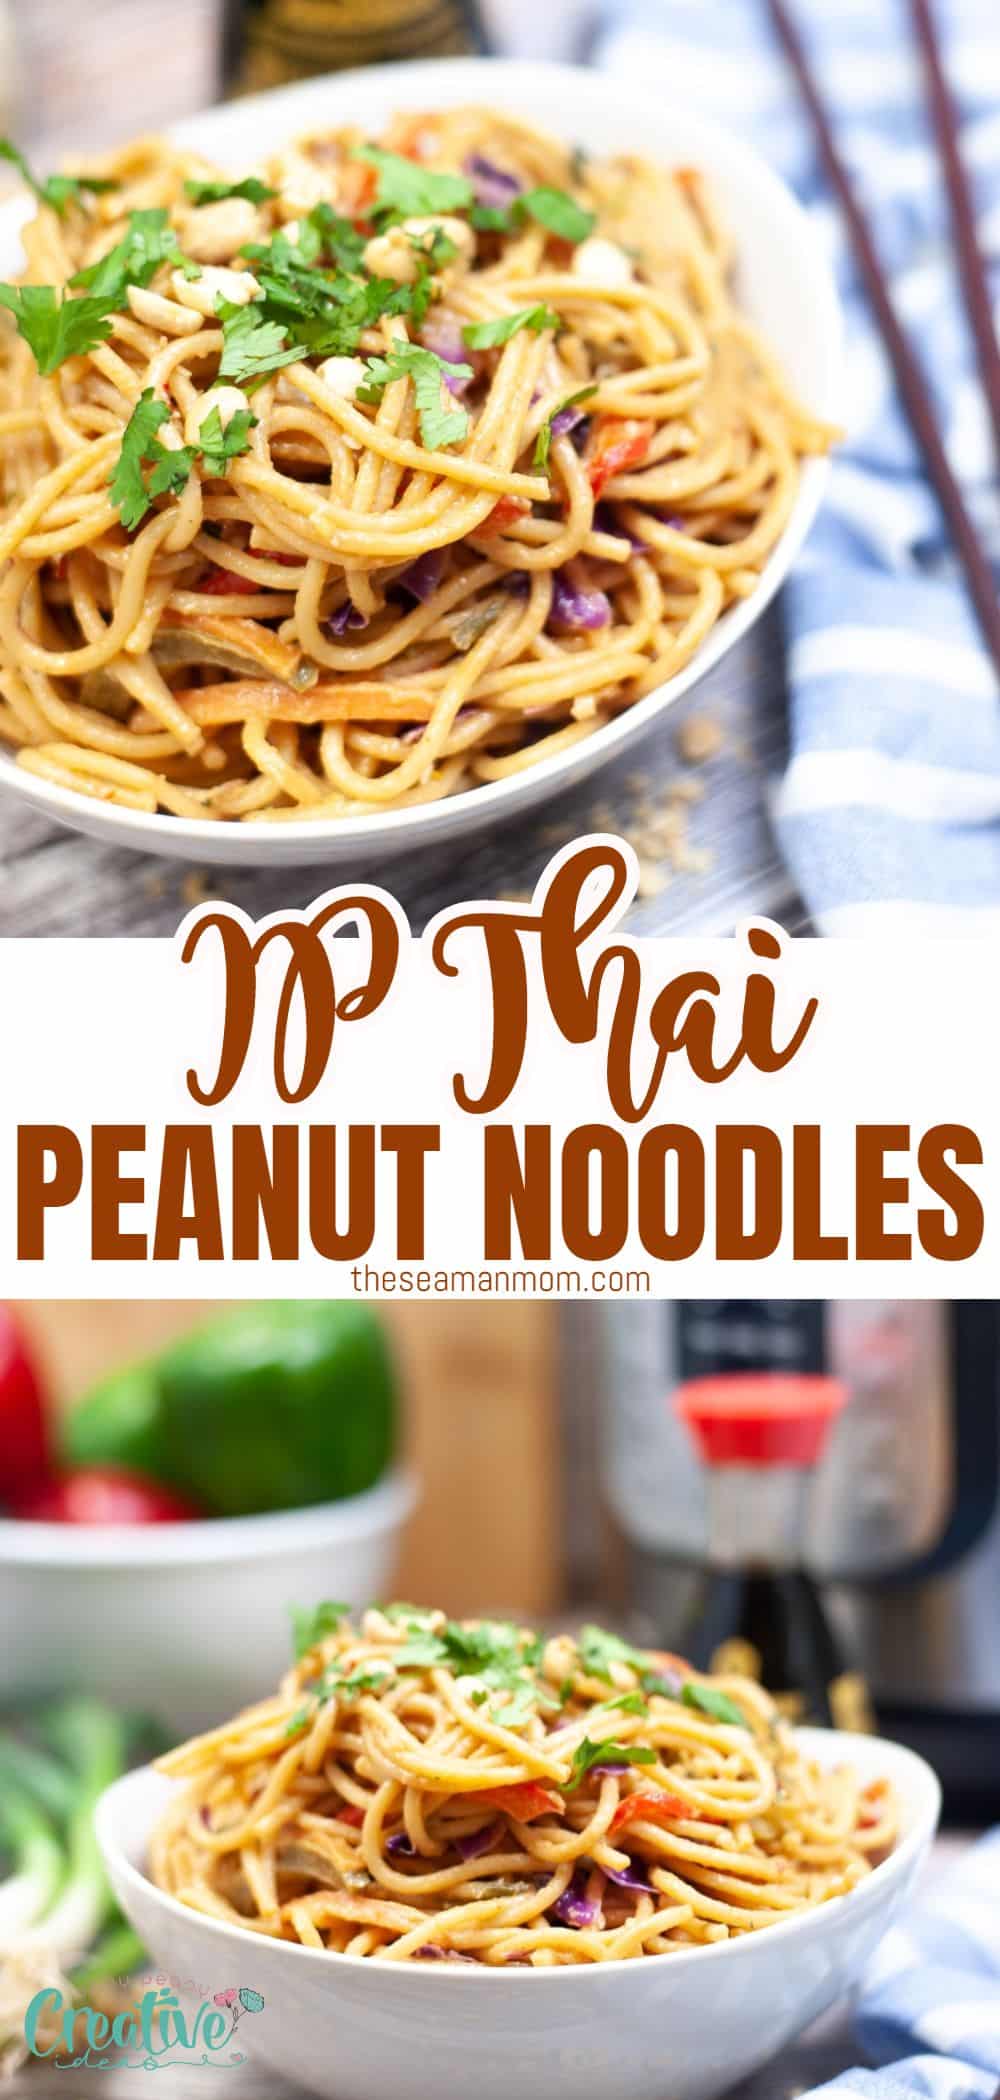 Tantalize your taste buds with the irresistible flavors of Thai peanut noodles! This easy-to-make peanut noodles recipe is ready in minutes and is perfect for a quick dinner or lunch. Try it today and enjoy the savory deliciousness of this unforgettable dish.  via @petroneagu